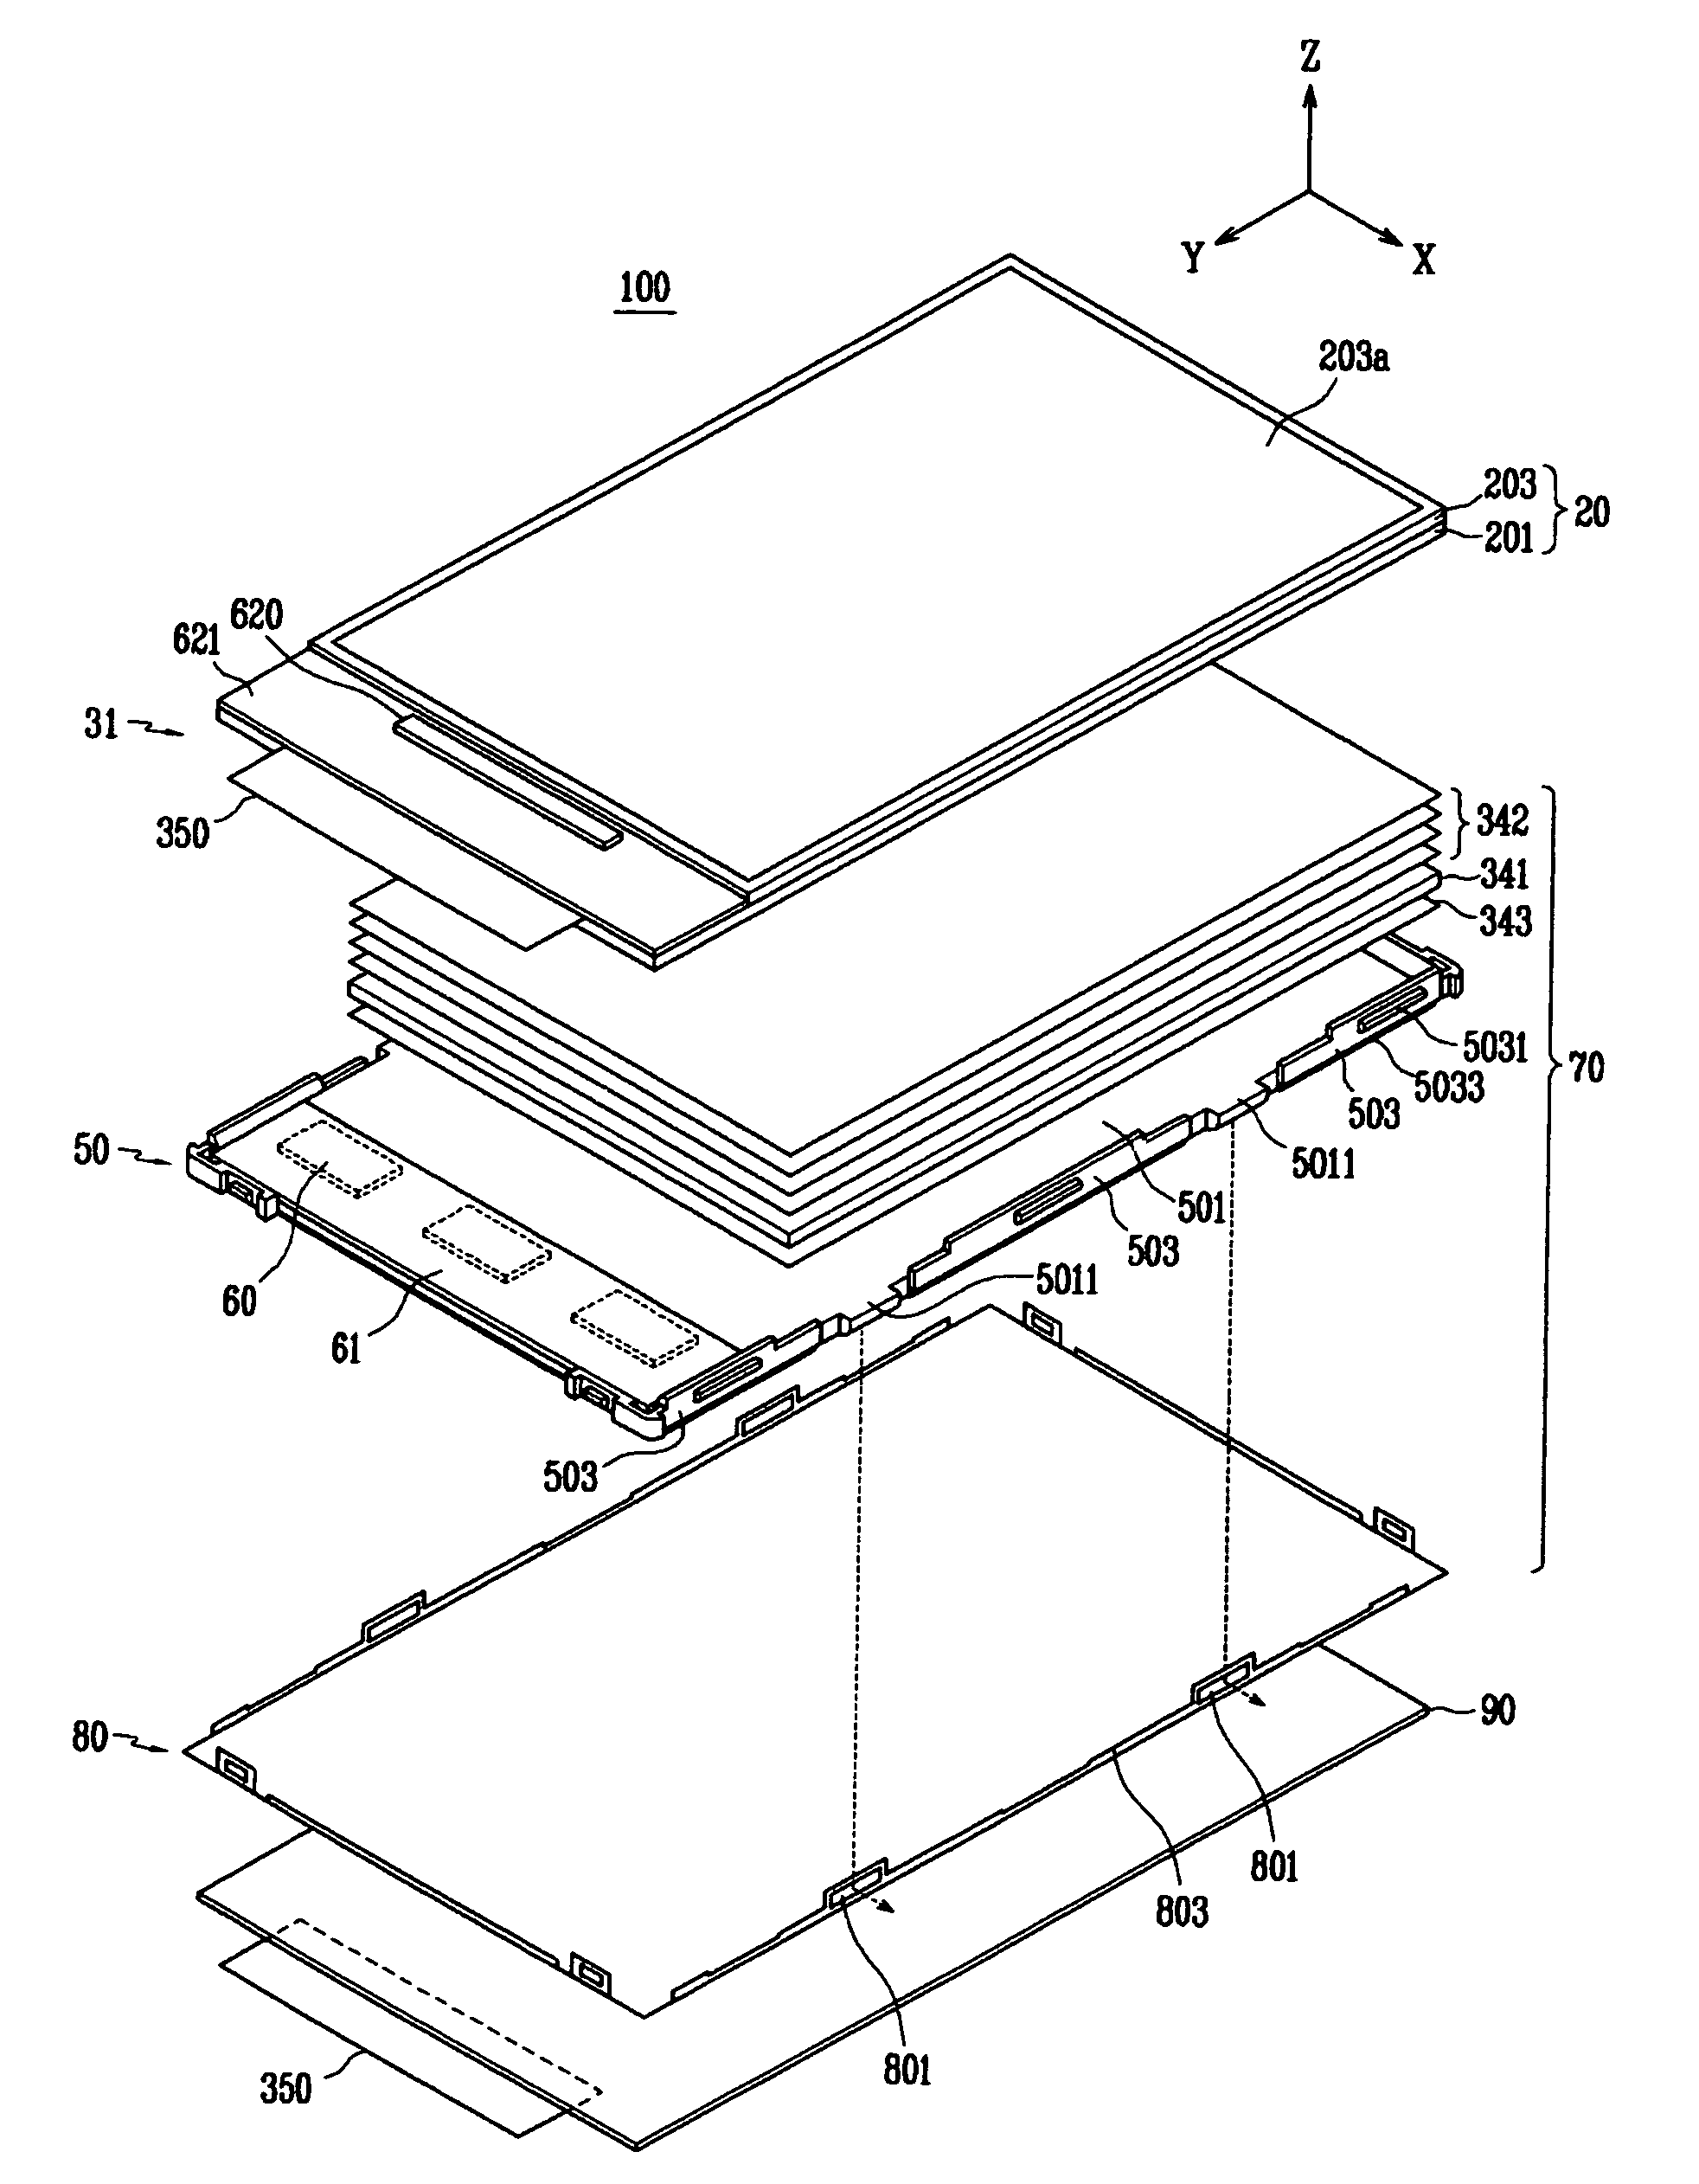 Display device having an enlarged display area